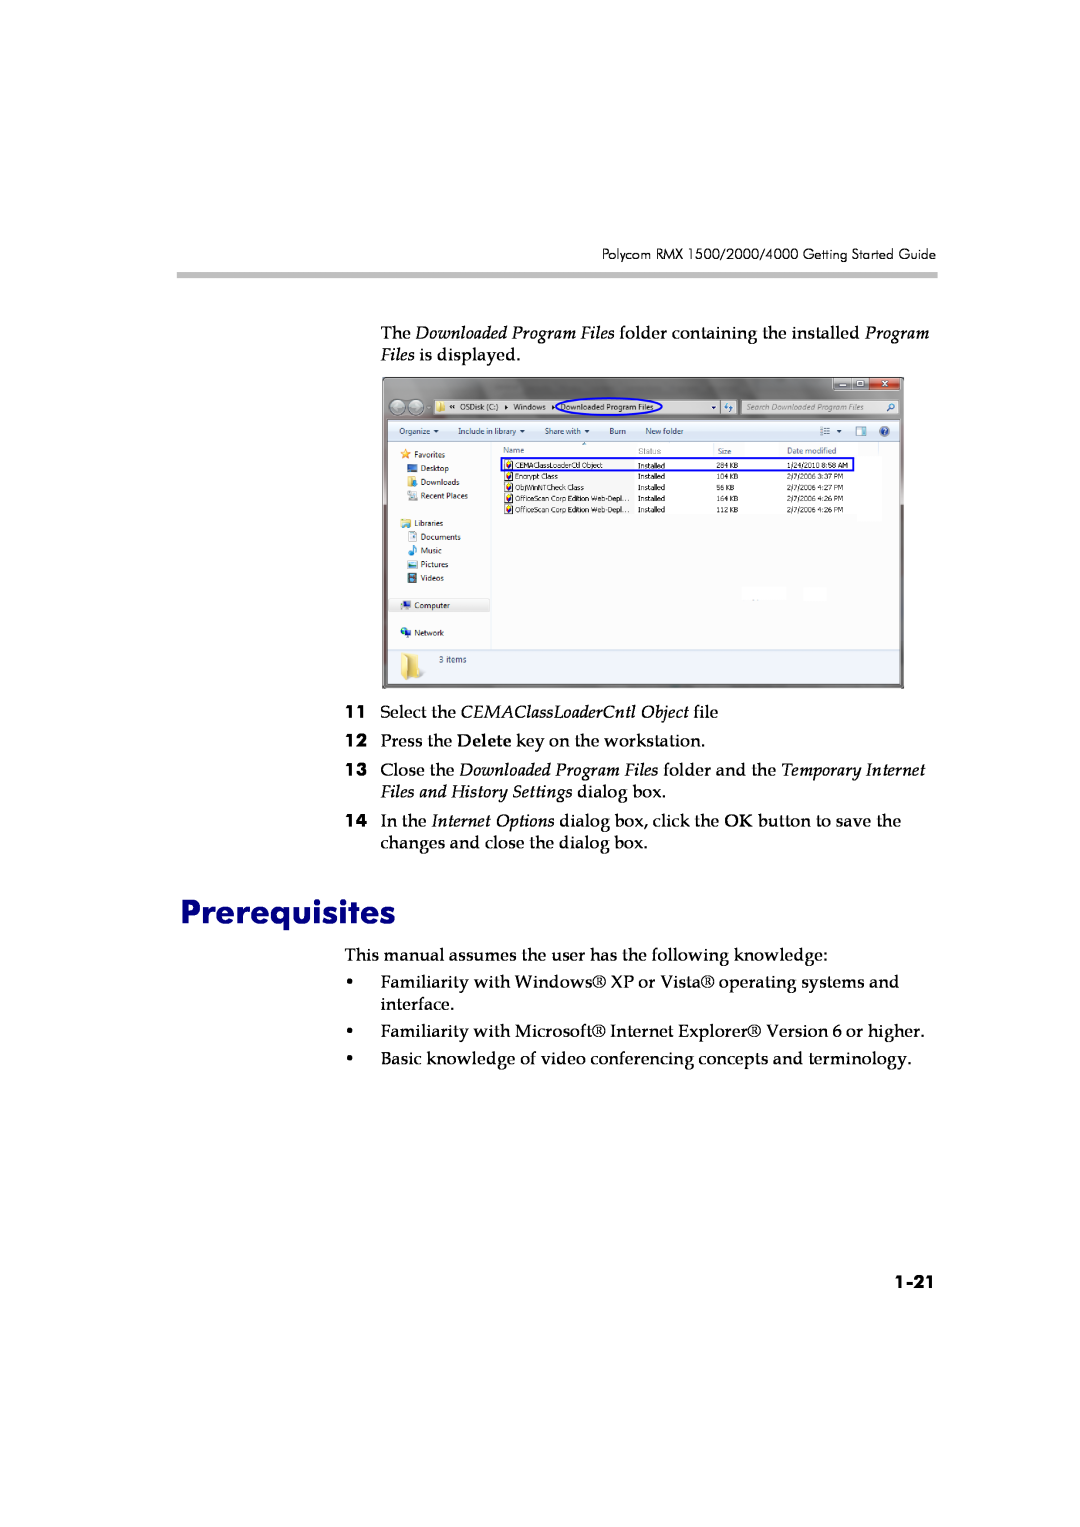 Polycom DOC2560B manual Prerequisites, Select the CEMAClassLoaderCntl Object file, 1-21 